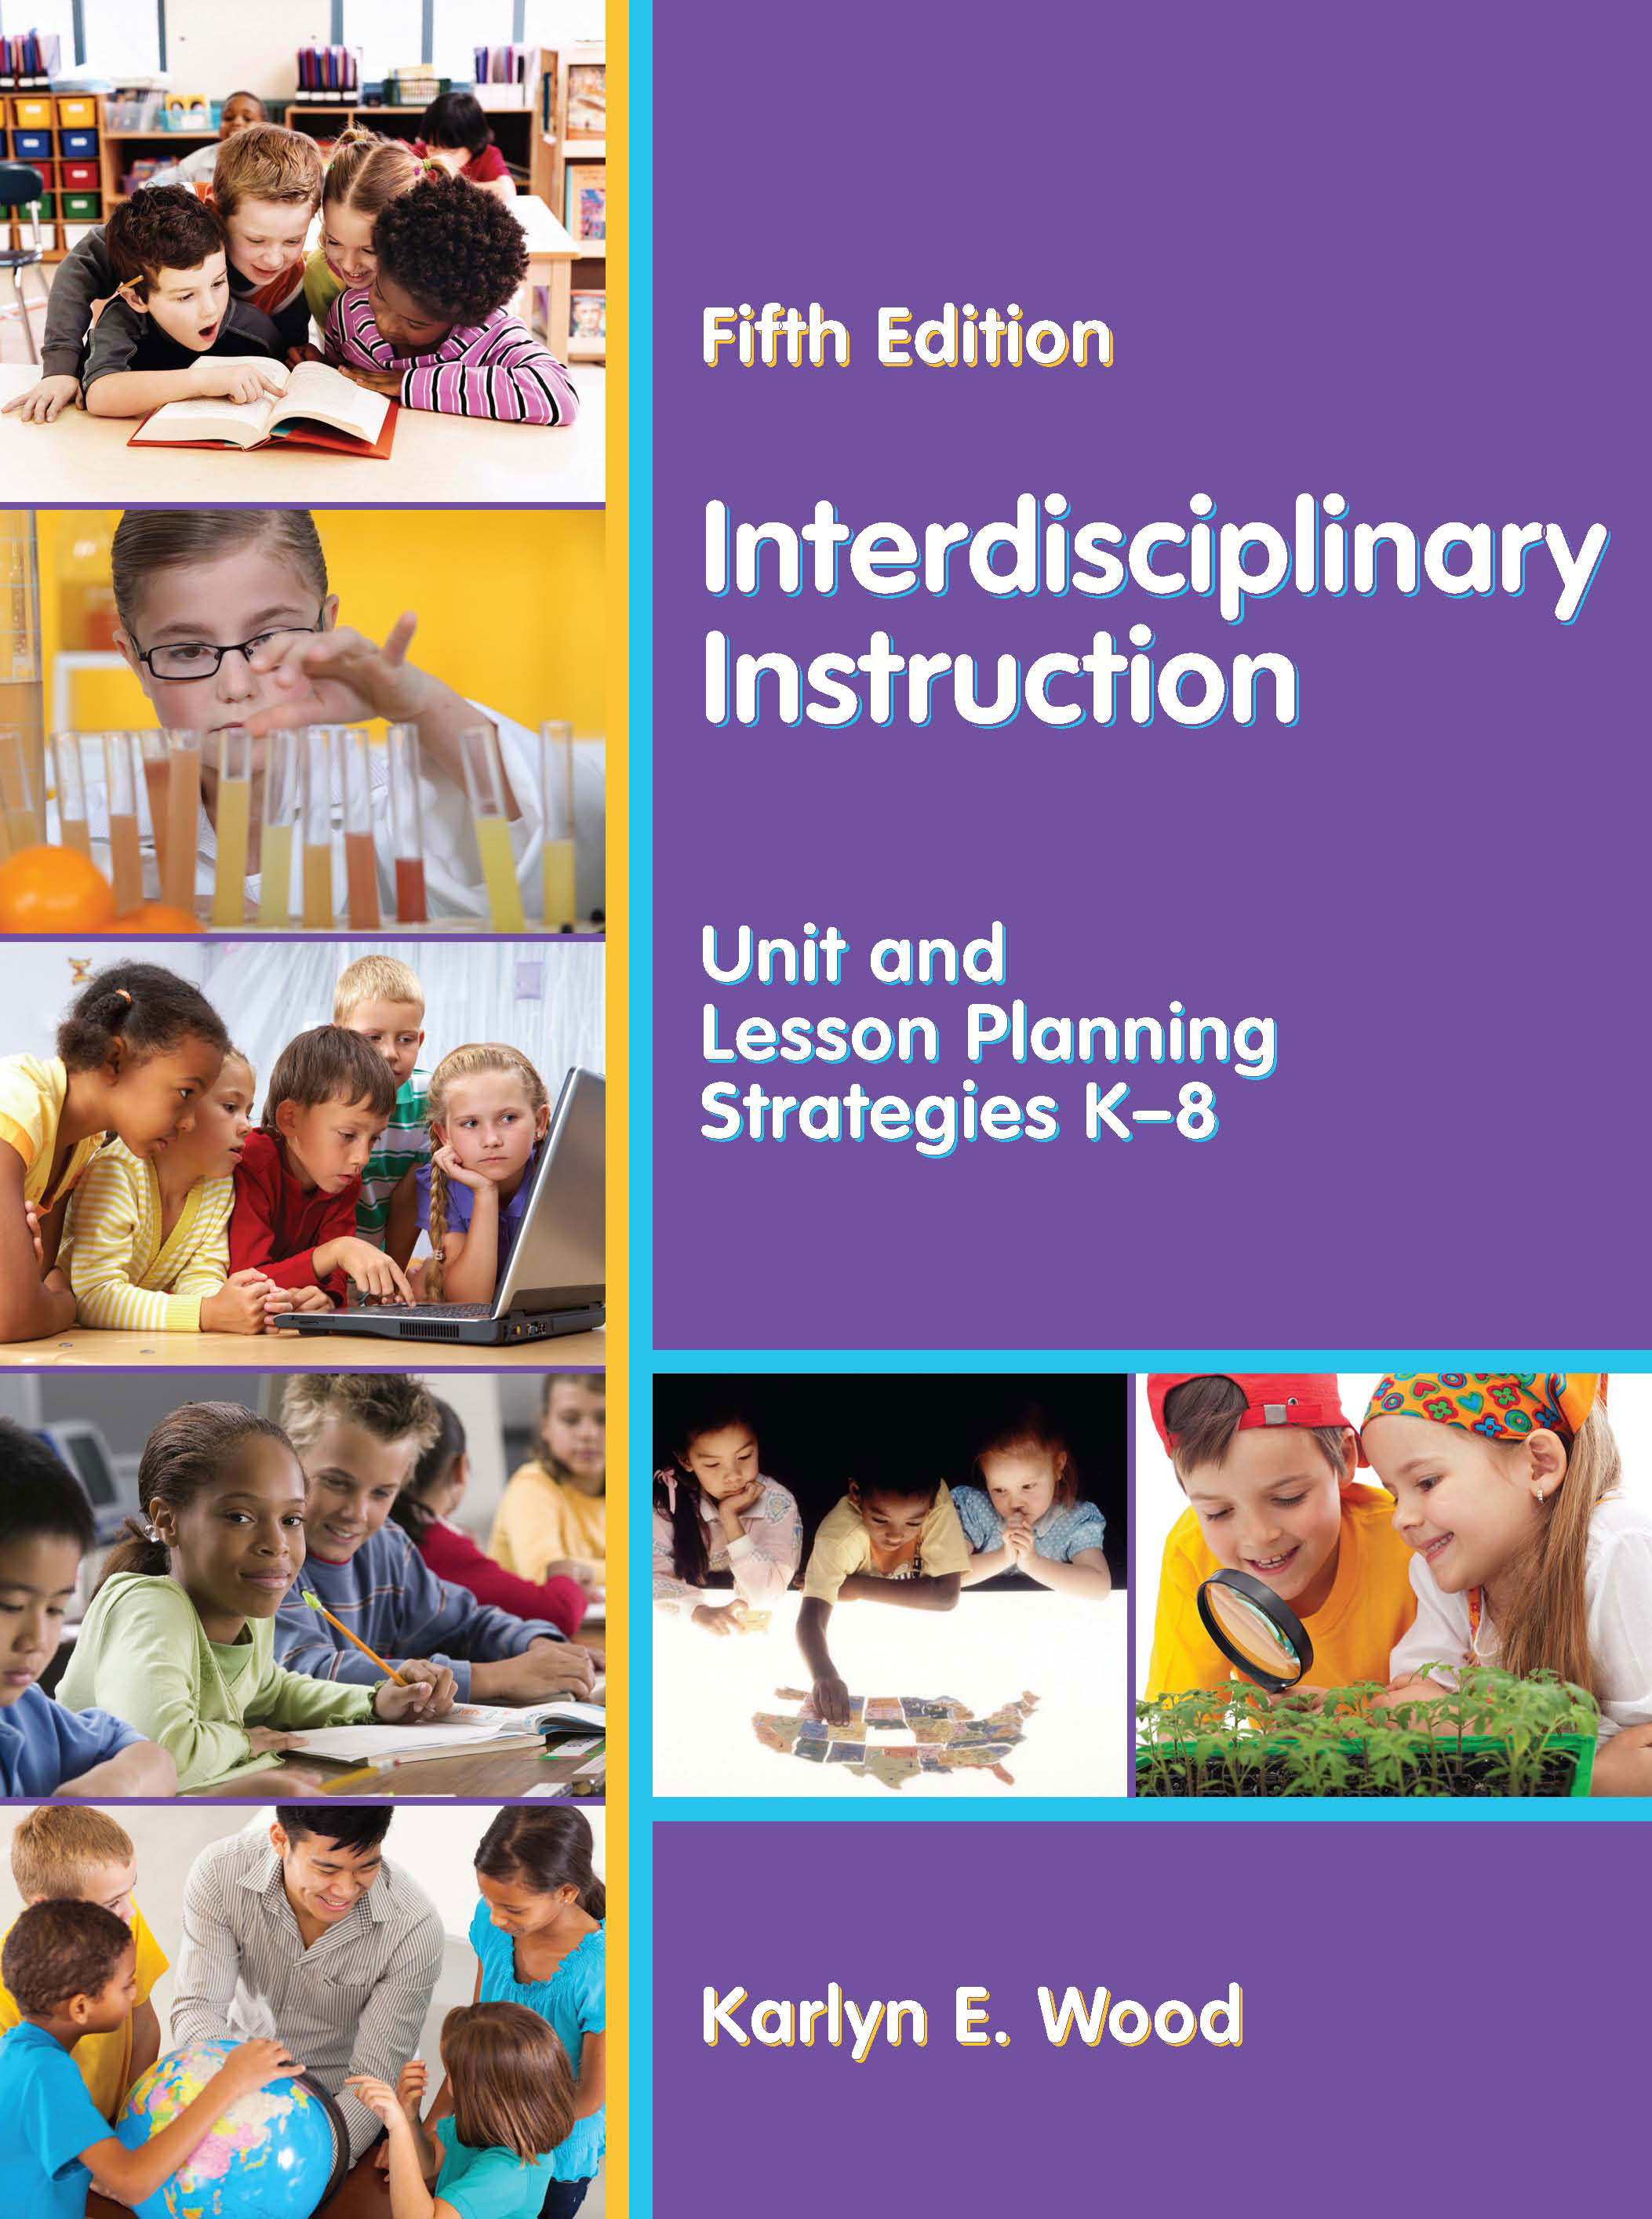 Interdisciplinary Instruction: Unit and Lesson Planning Strategies K-8, Fifth Edition by Karlyn E. Wood